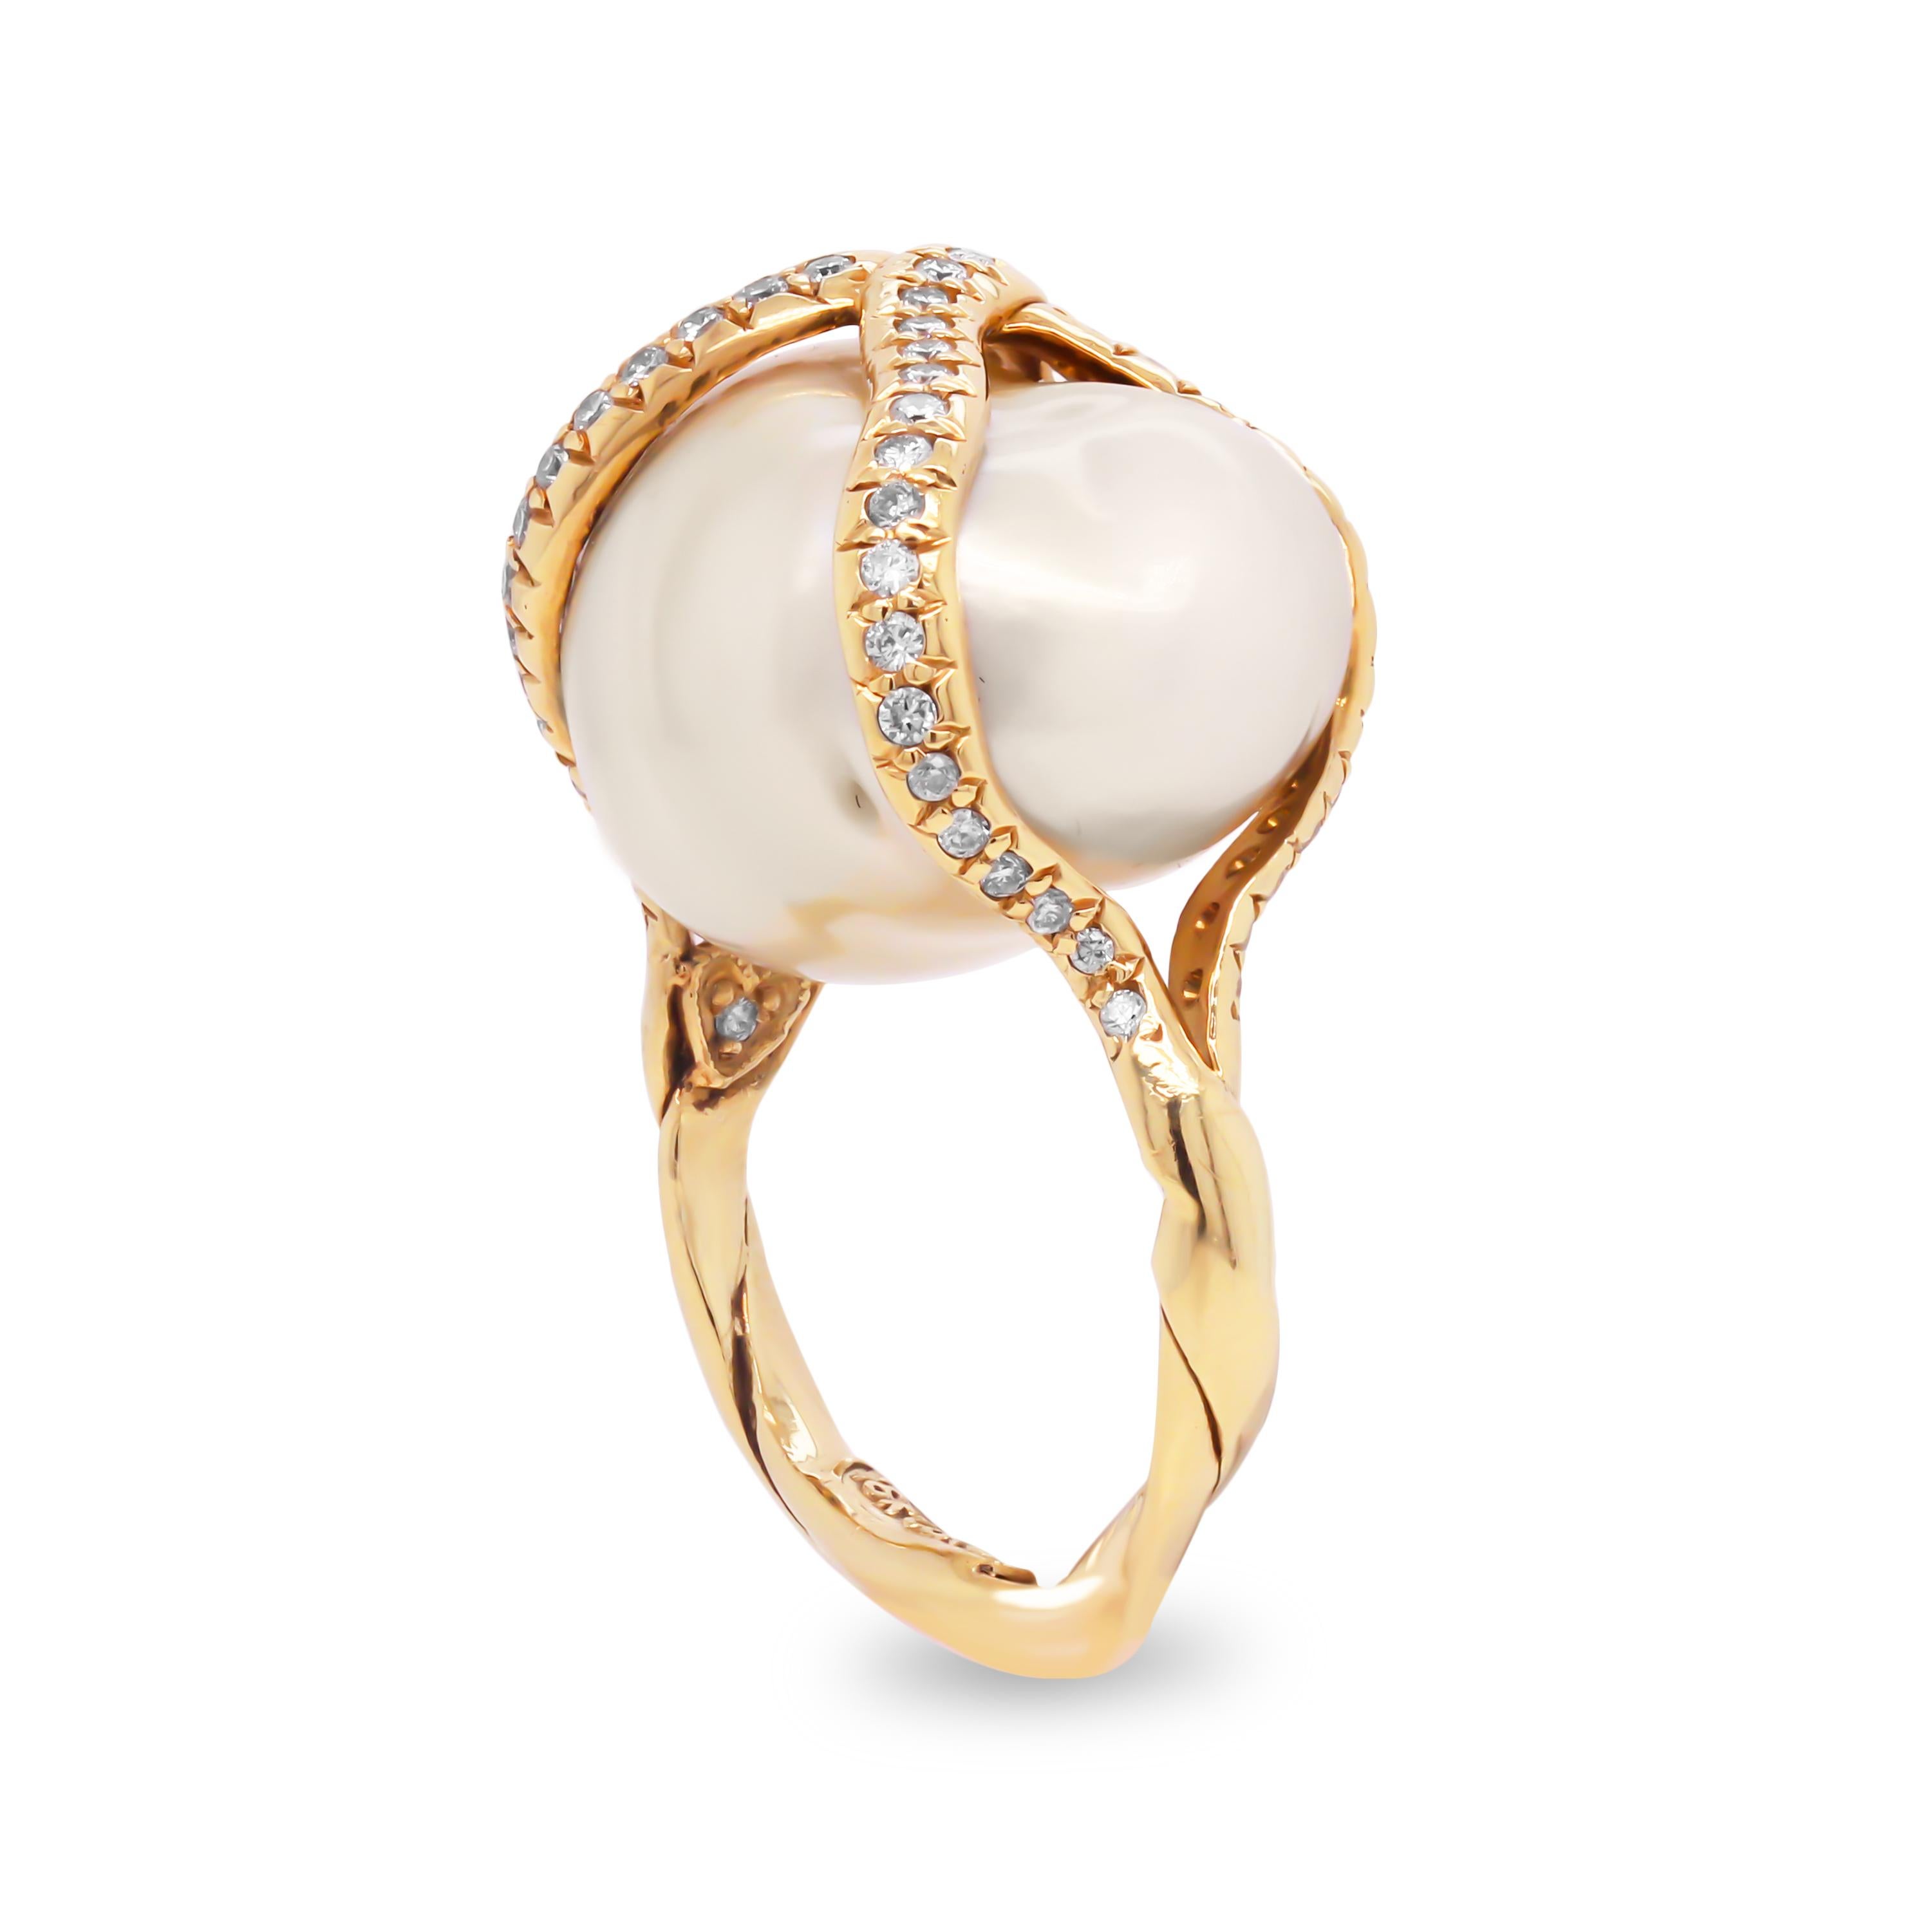 18k Yellow Gold Ring and Diamond Ring with South Sea Baroque Pearl Center by Stambolian

This beautiful ring is a one-of-a-kind by Stambolian and features an 